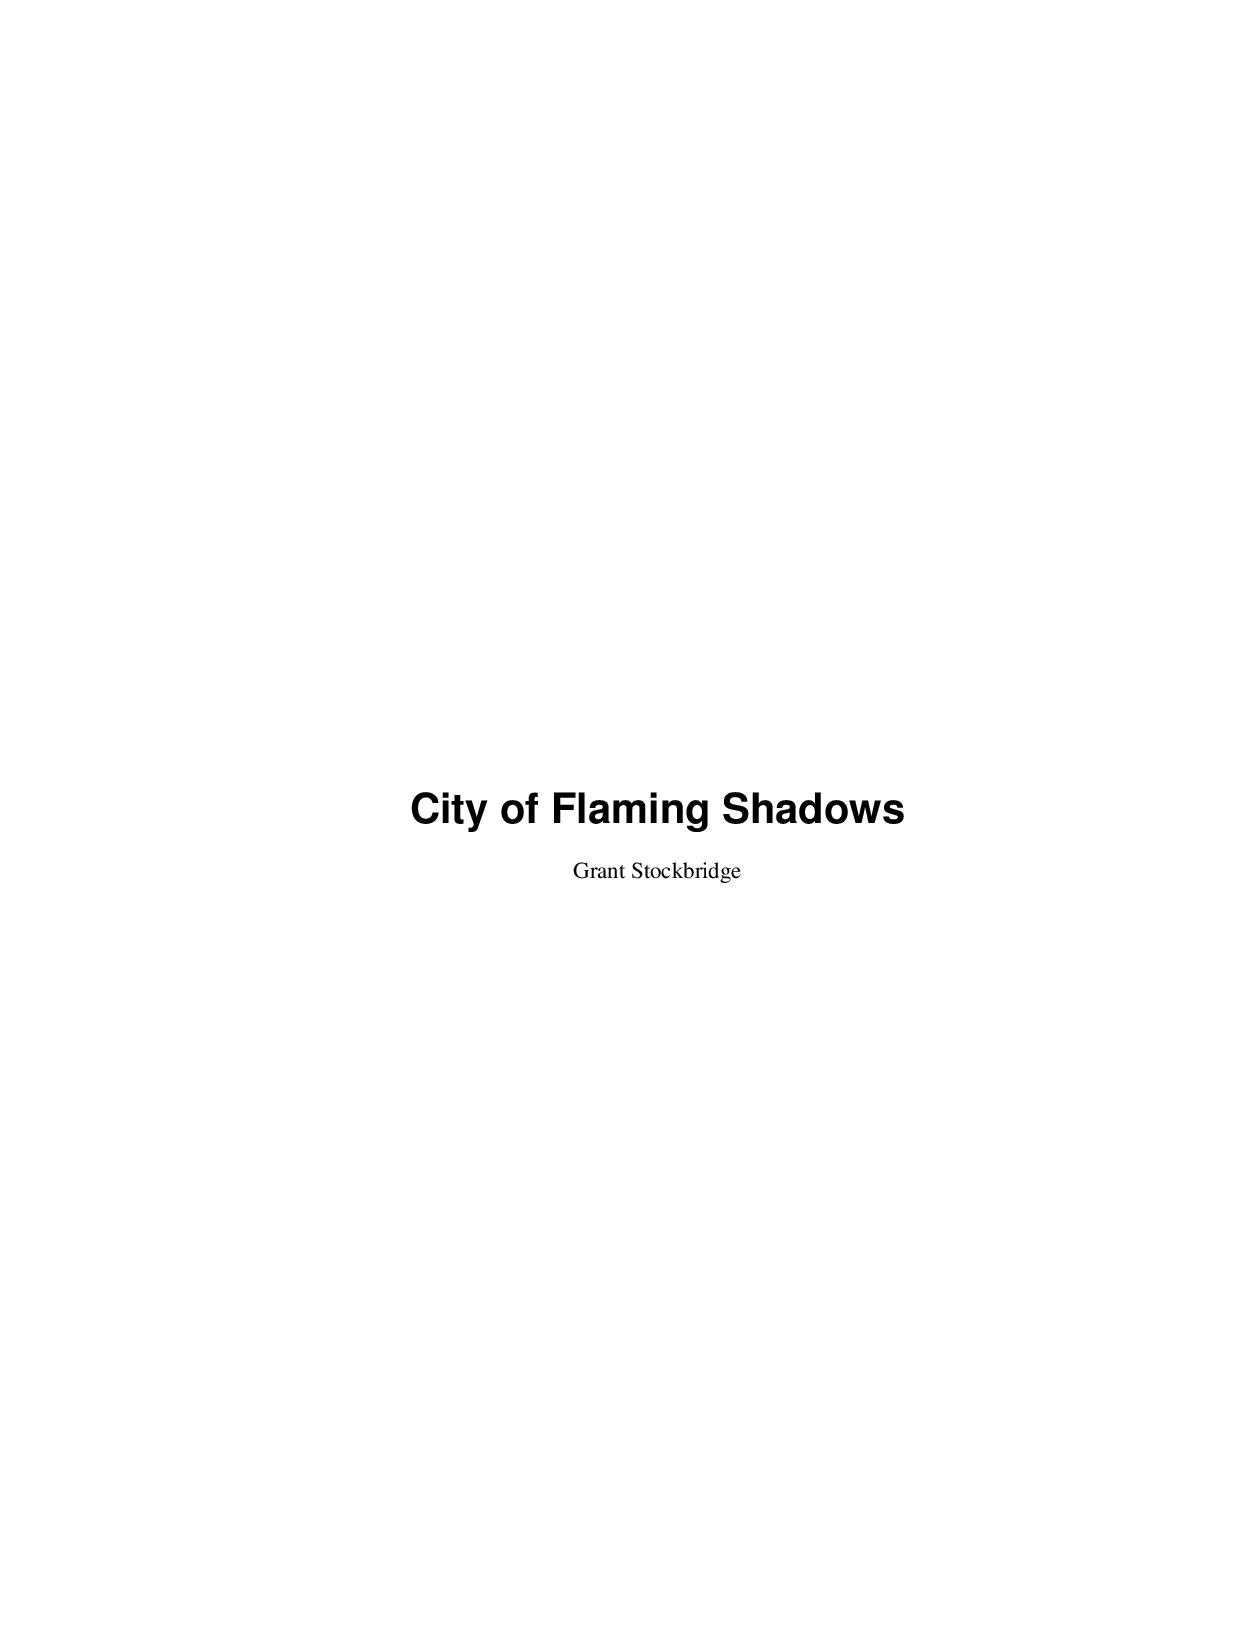 Book Cover For The Spider 4 - City of Flaming Shadows - Grant Stockbridge